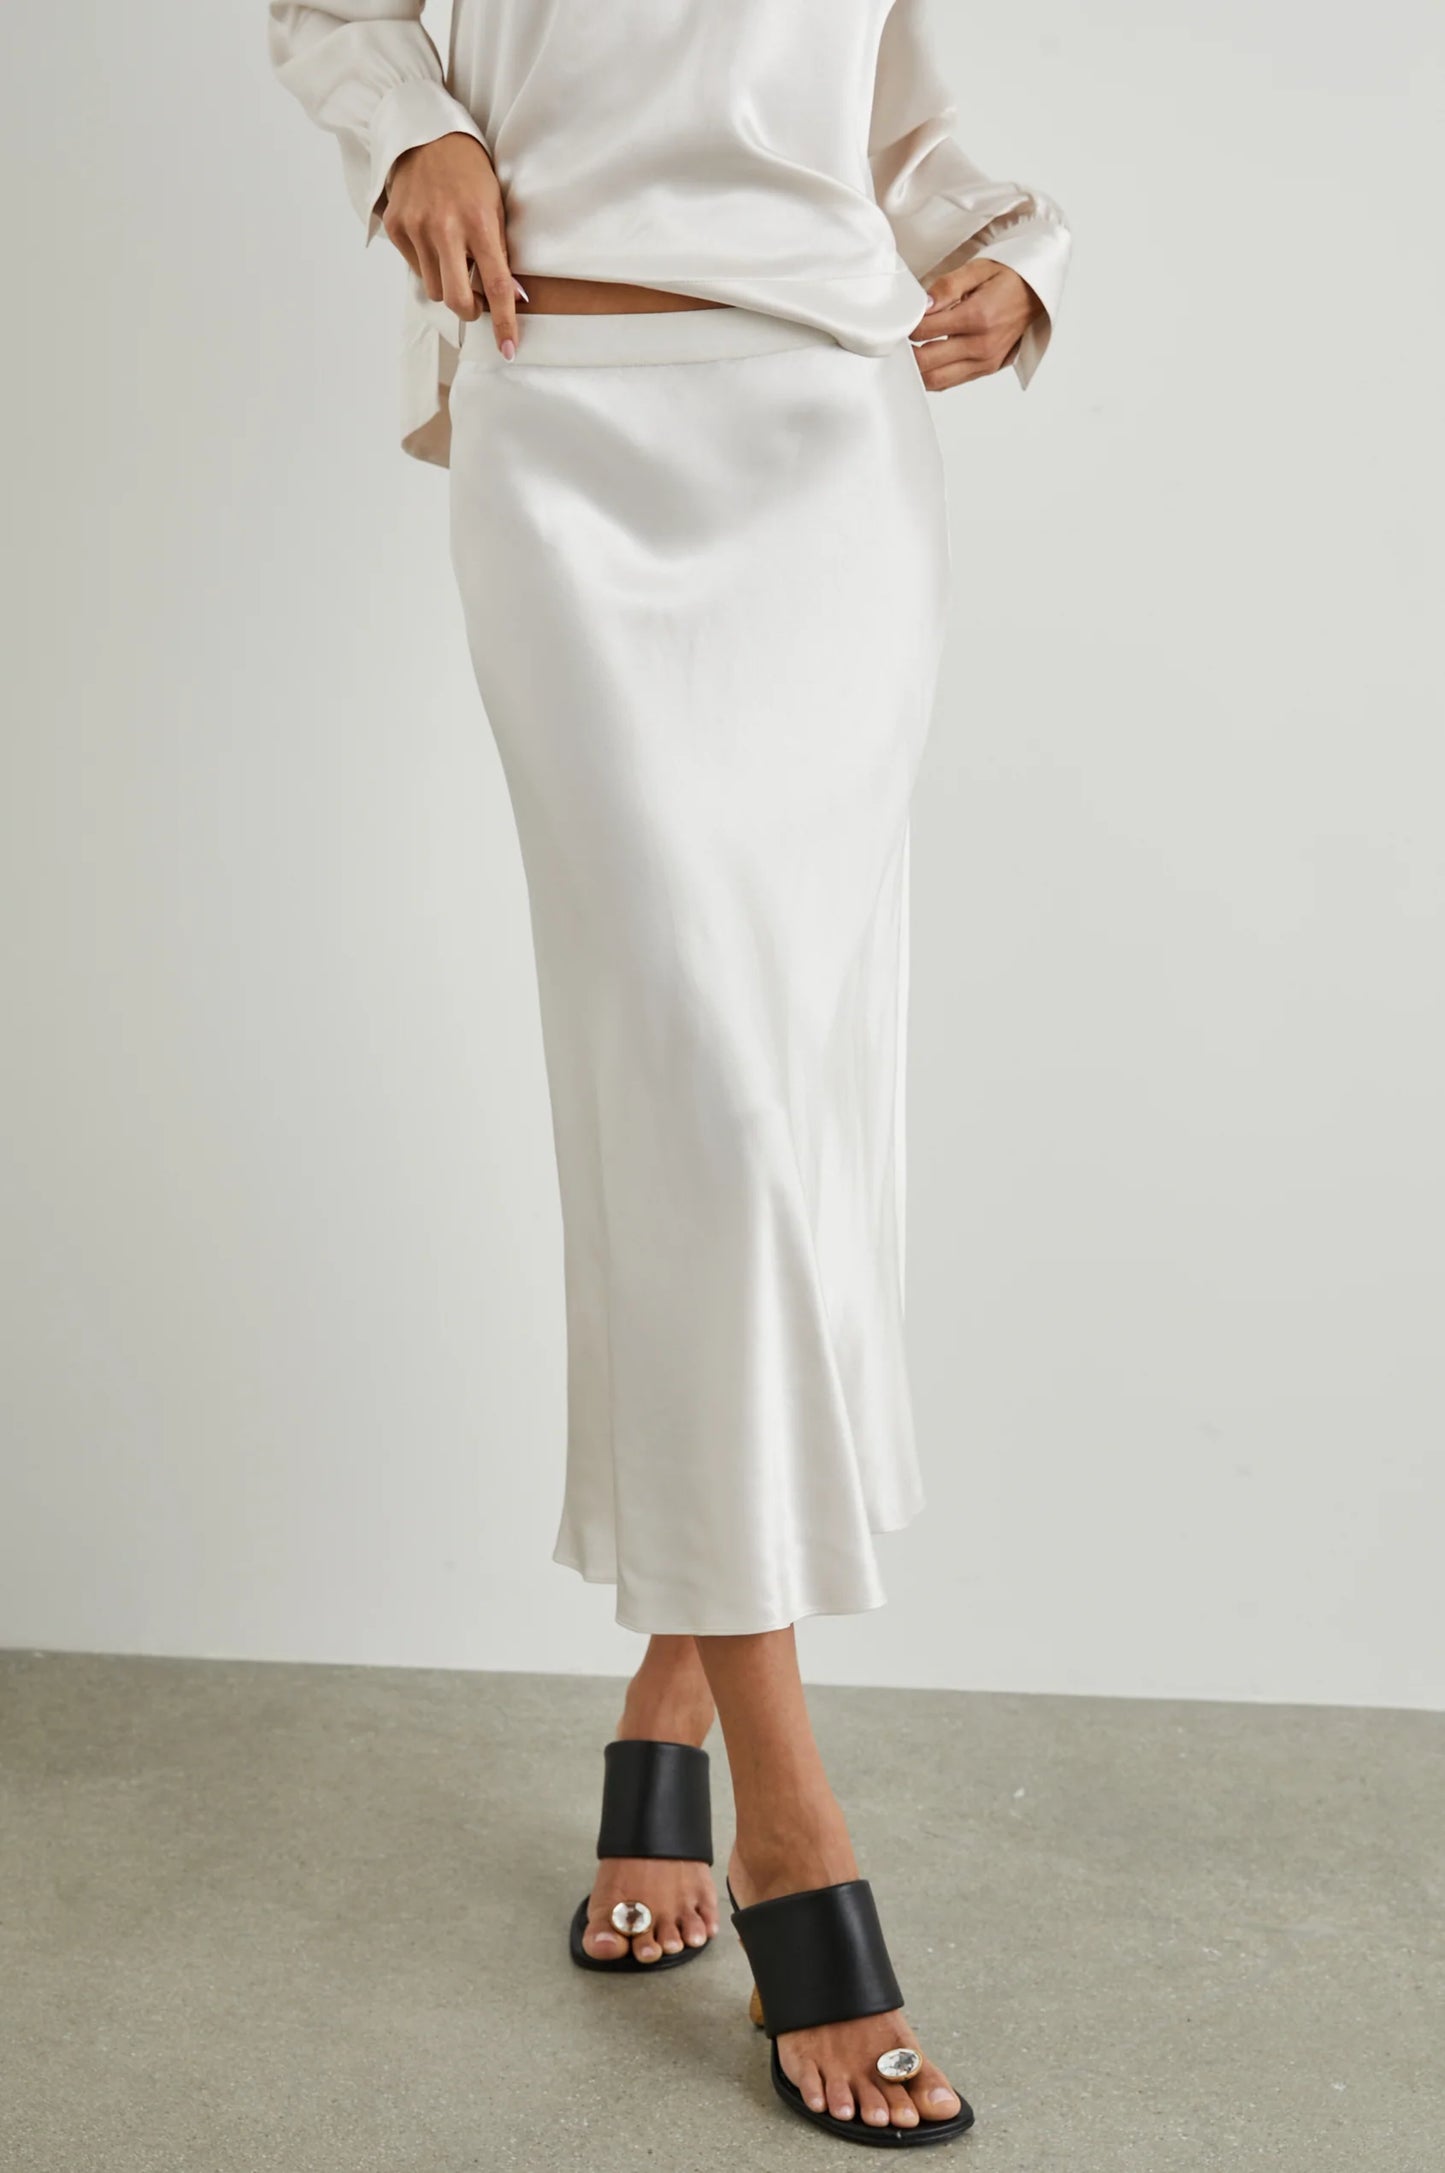 The ivory Berlin Skirt by Rails